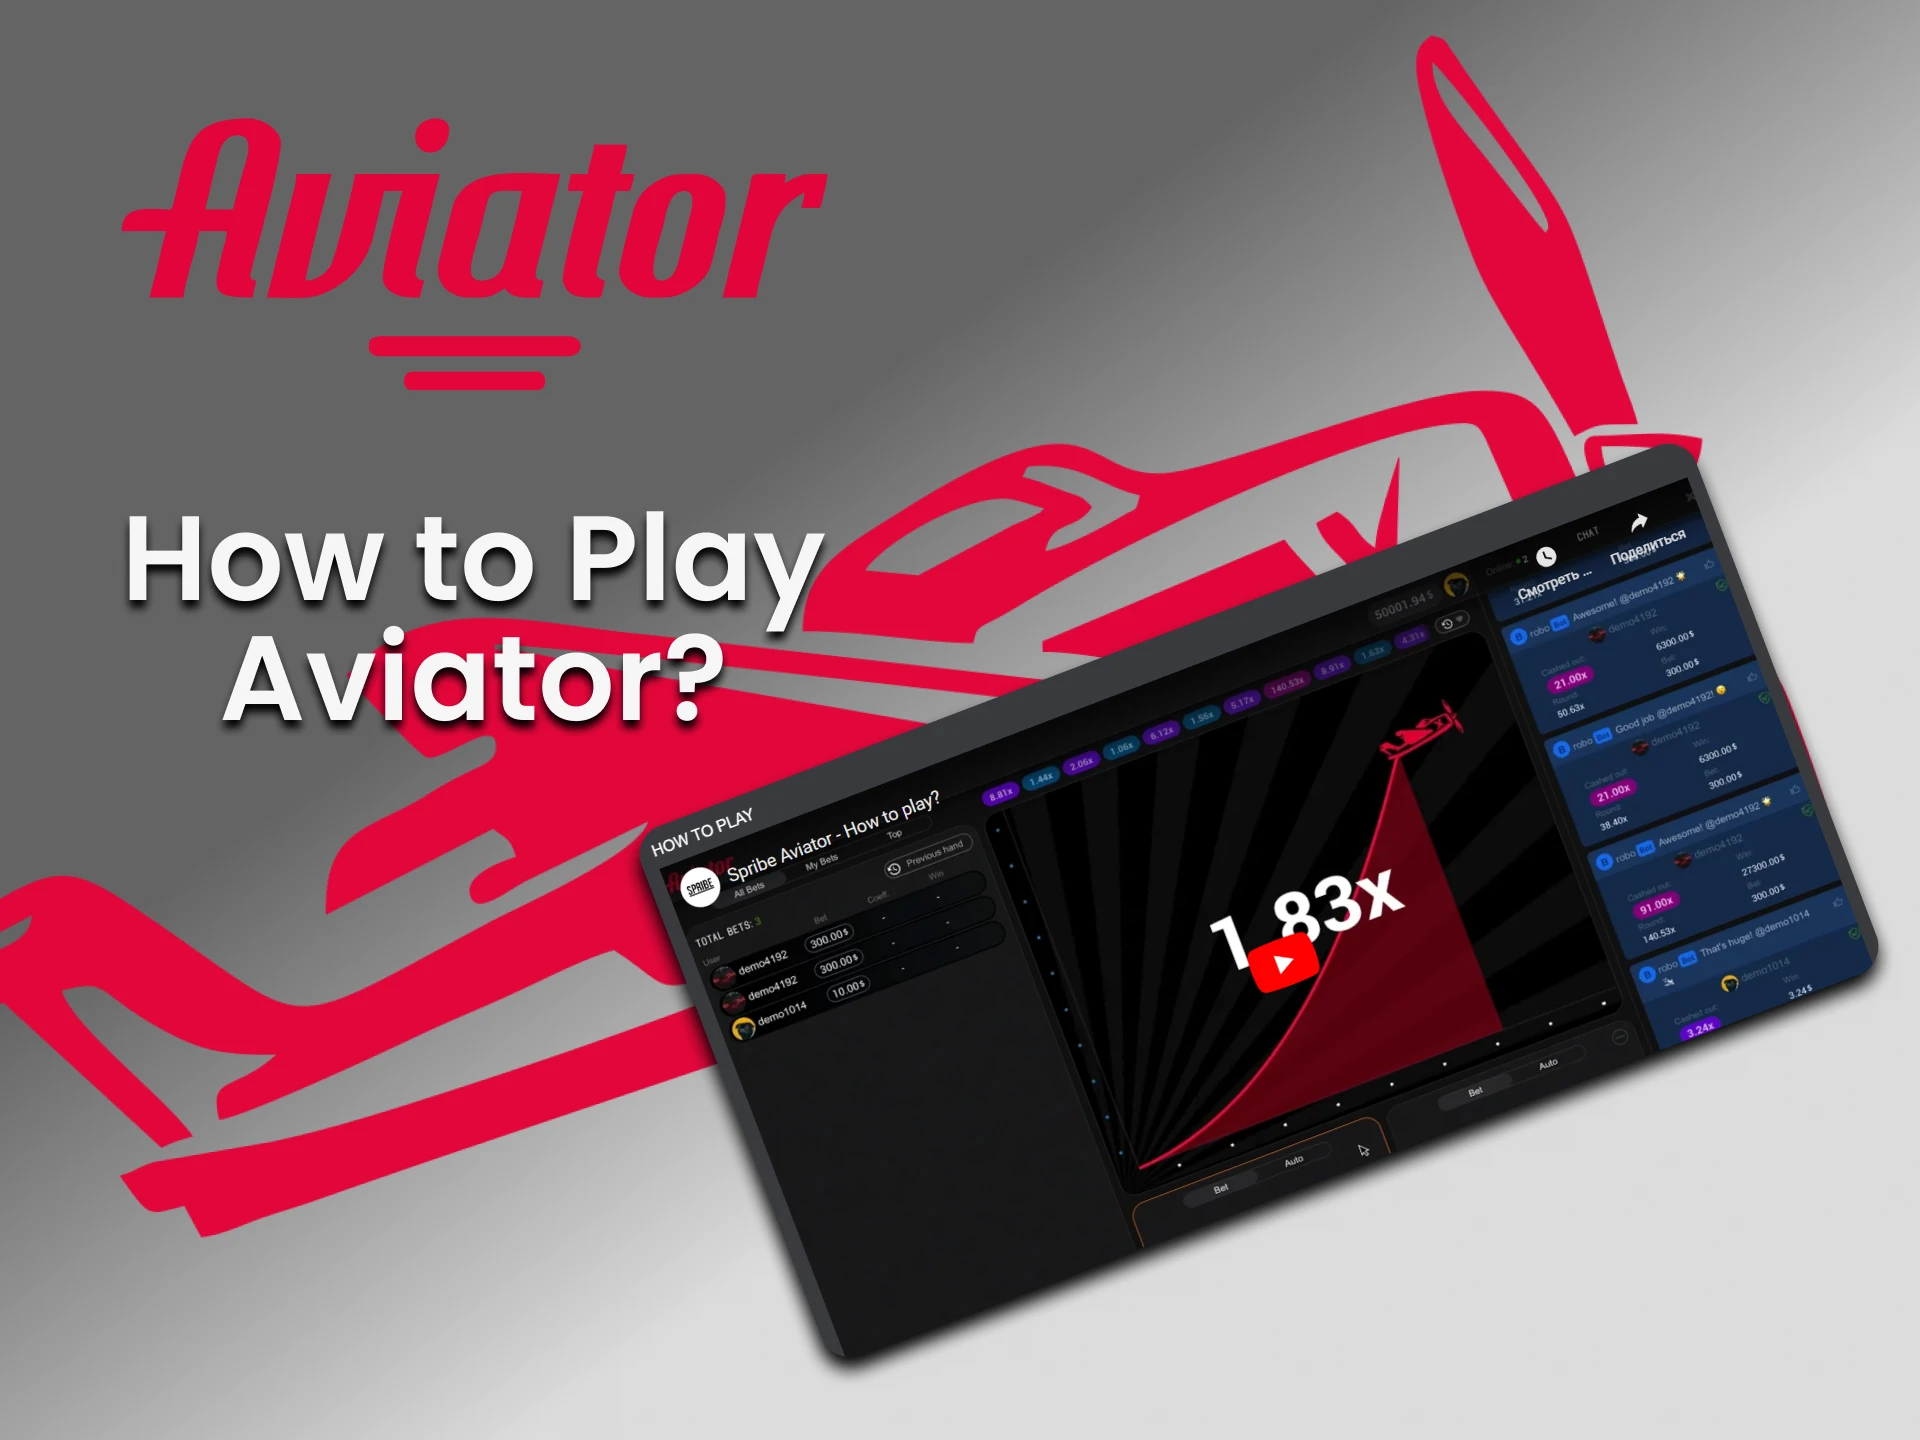 Read the instructions for playing Aviator.